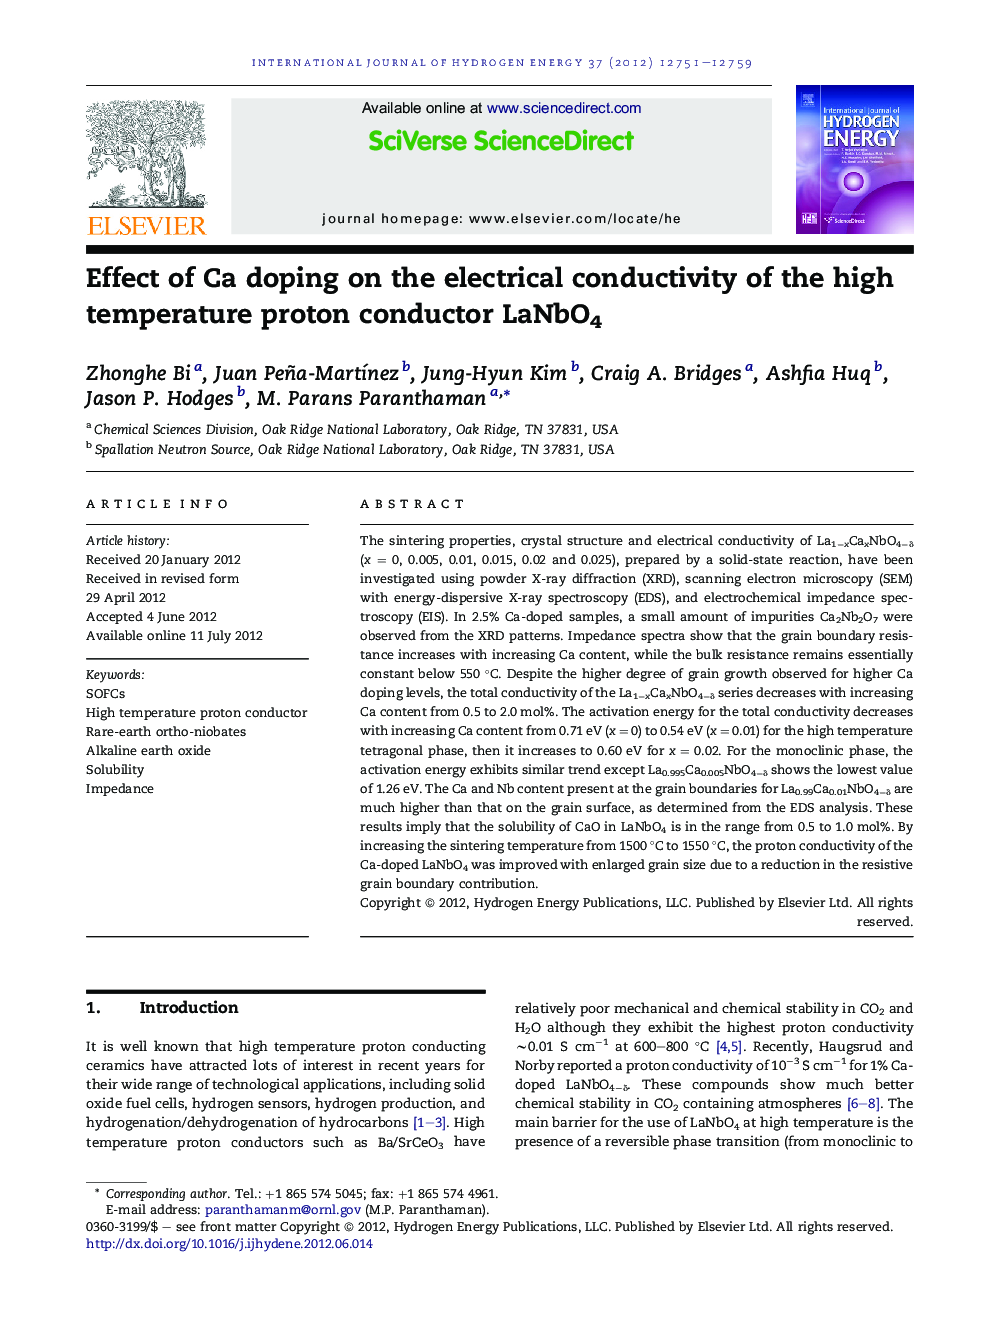 Effect of Ca doping on the electrical conductivity of the high temperature proton conductor LaNbO4